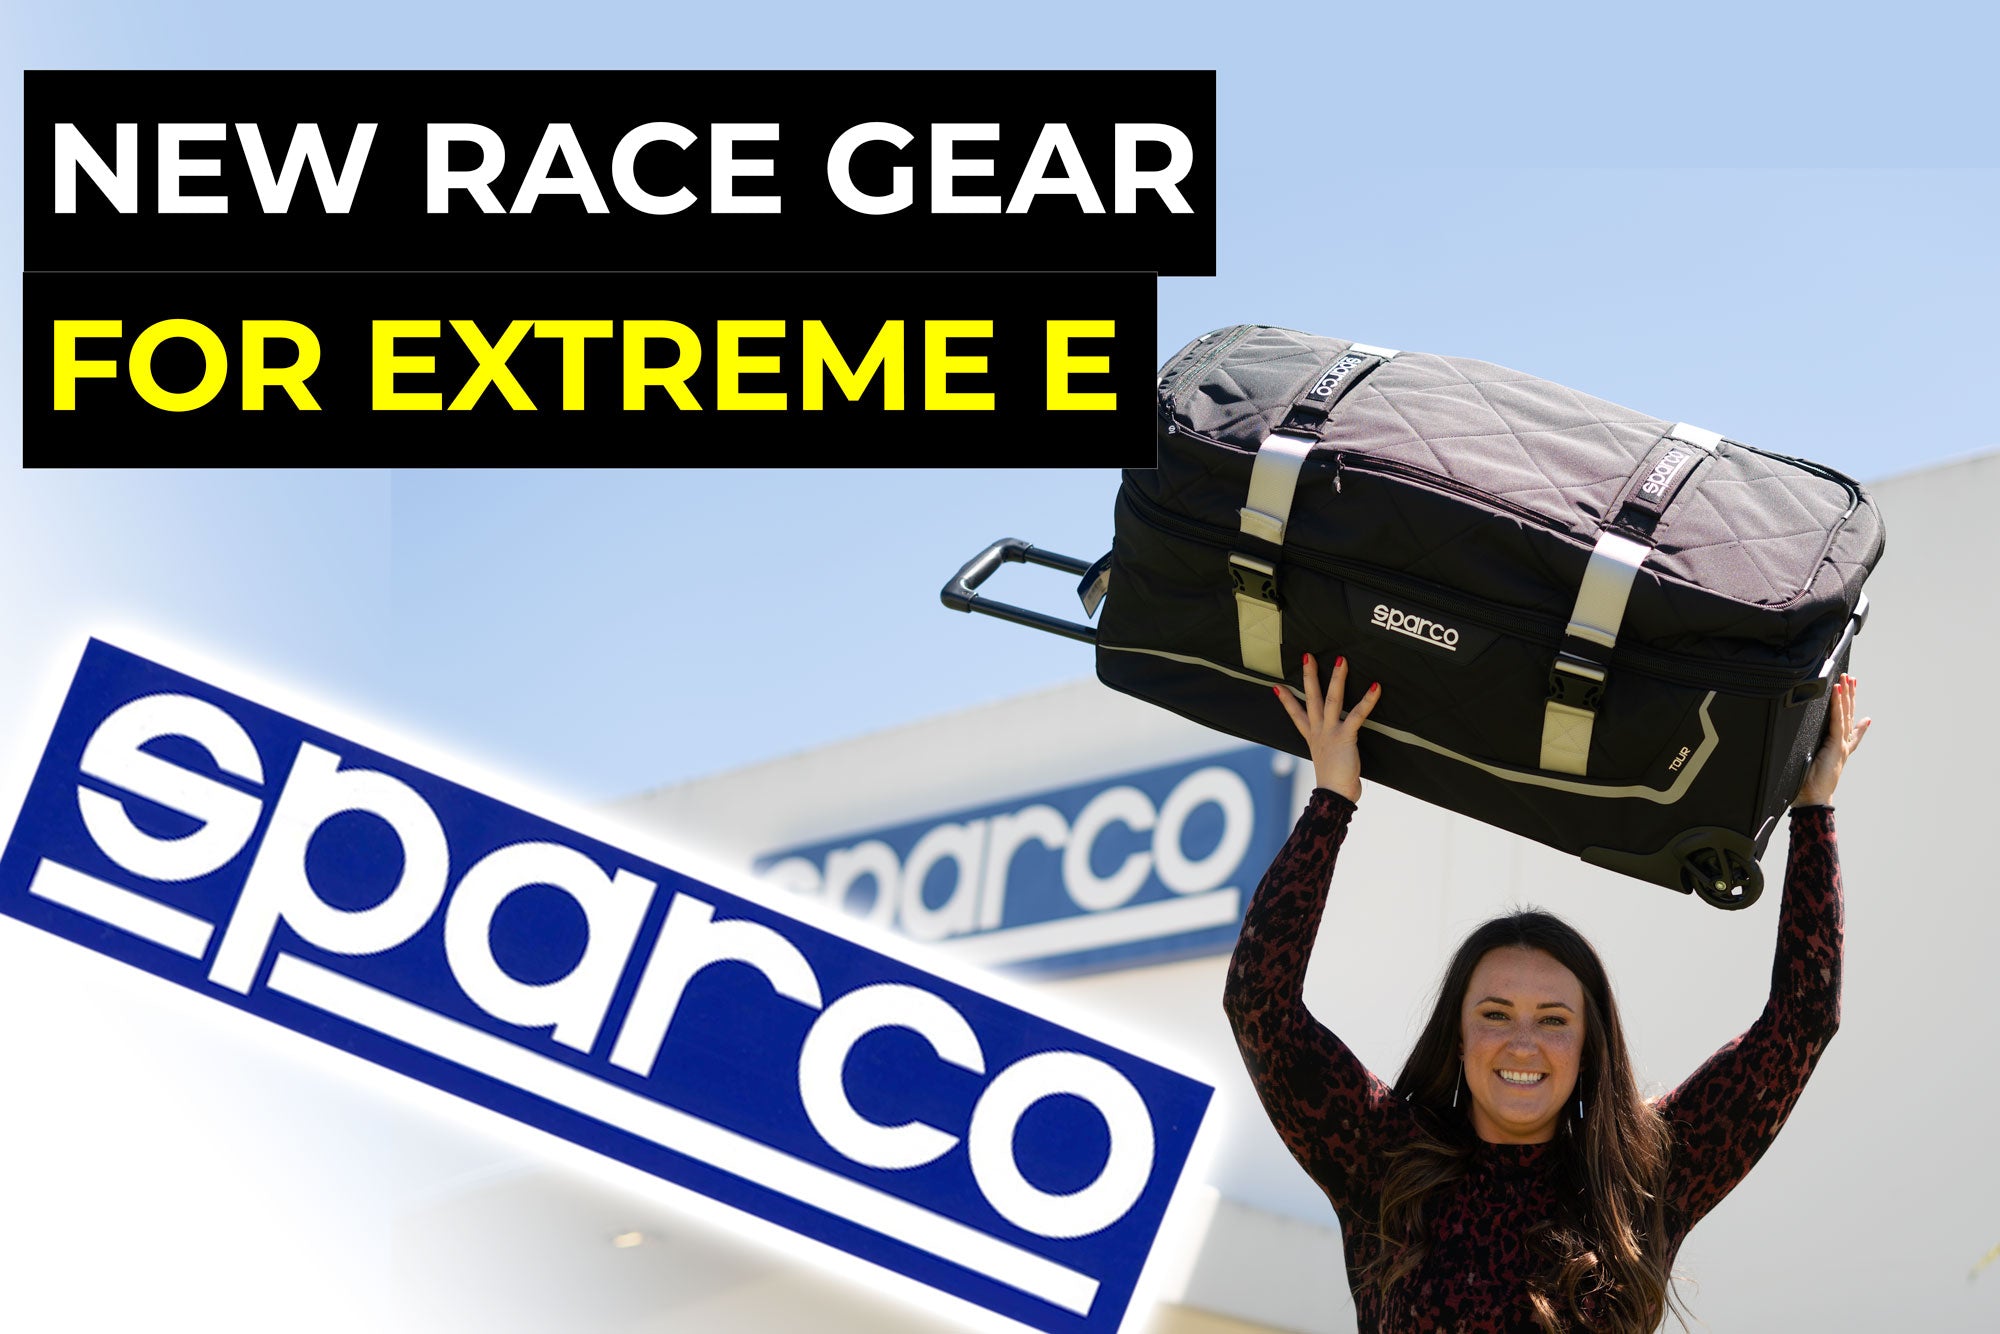 #SPTV EP 8 Visiting Sparco for Extreme E FIA Race Safety Gear